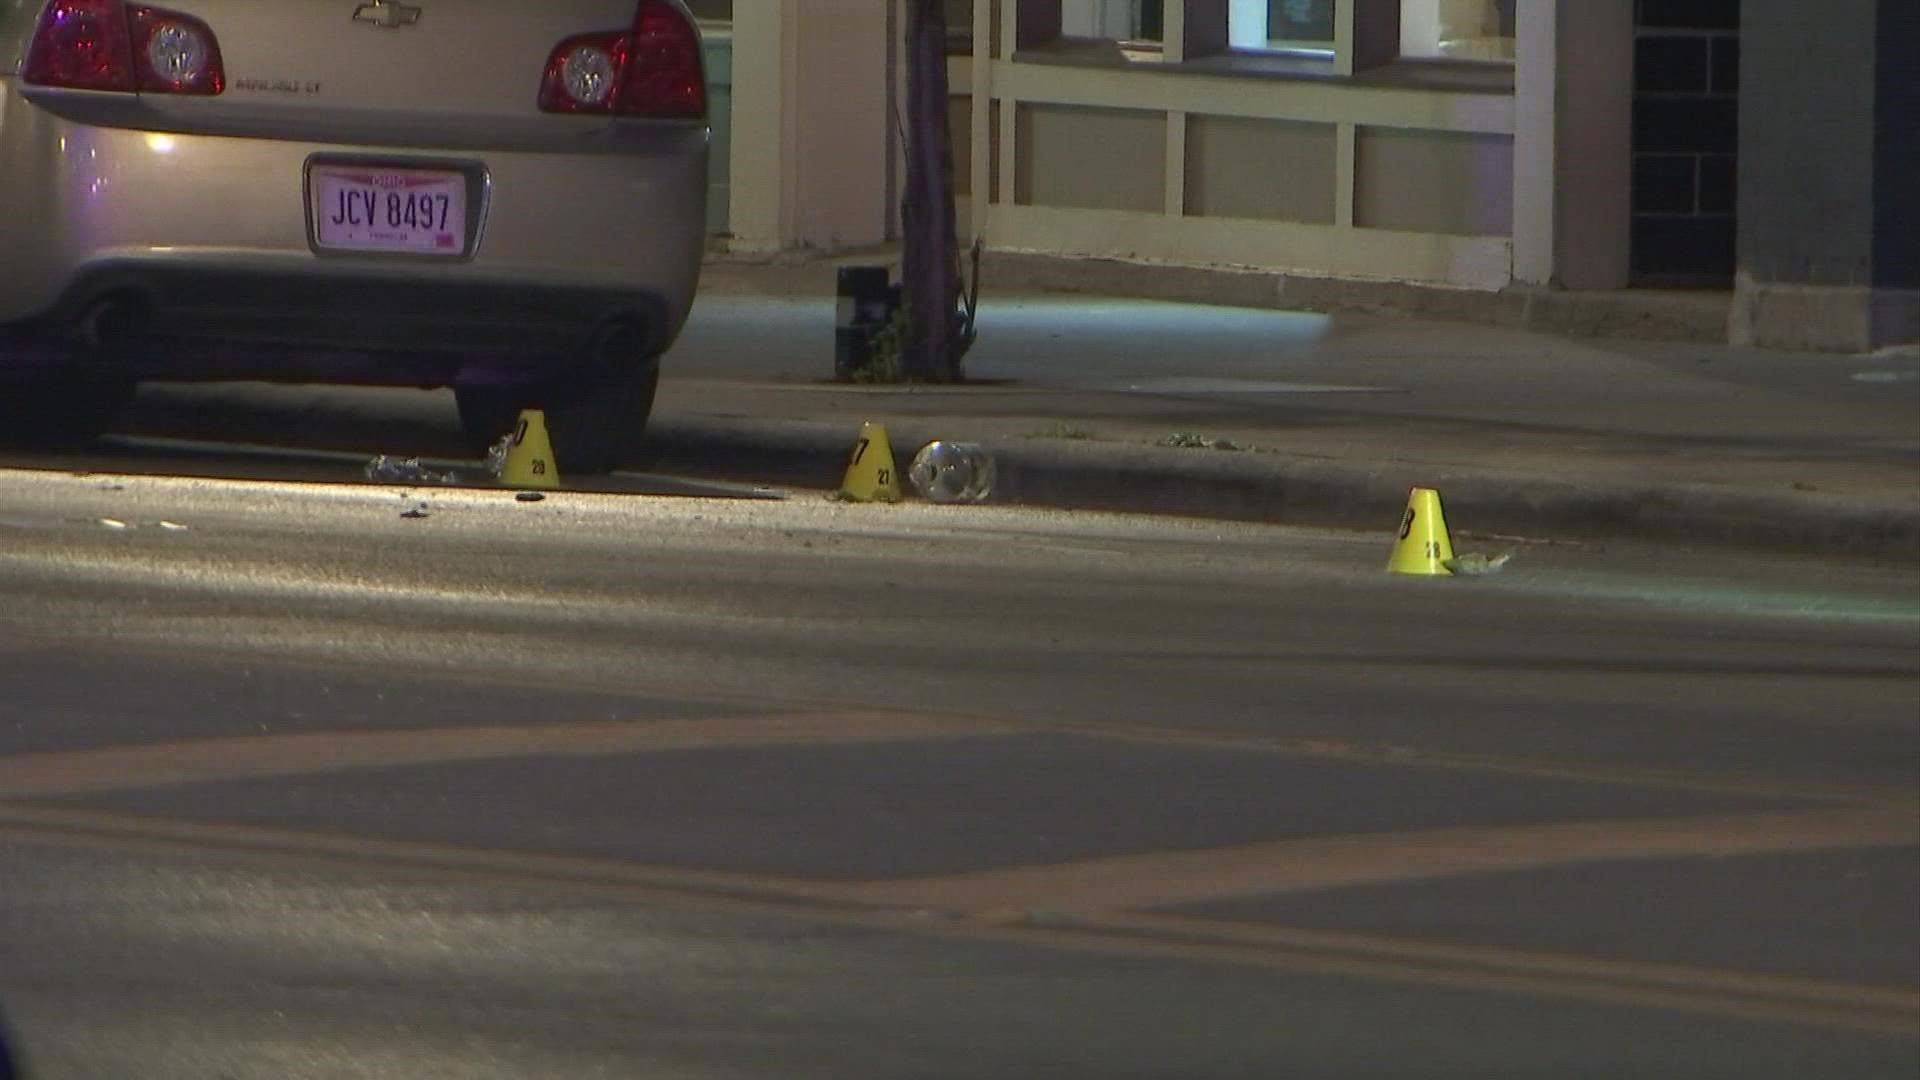 Over the weekend, there were four shootings across the City of Columbus.